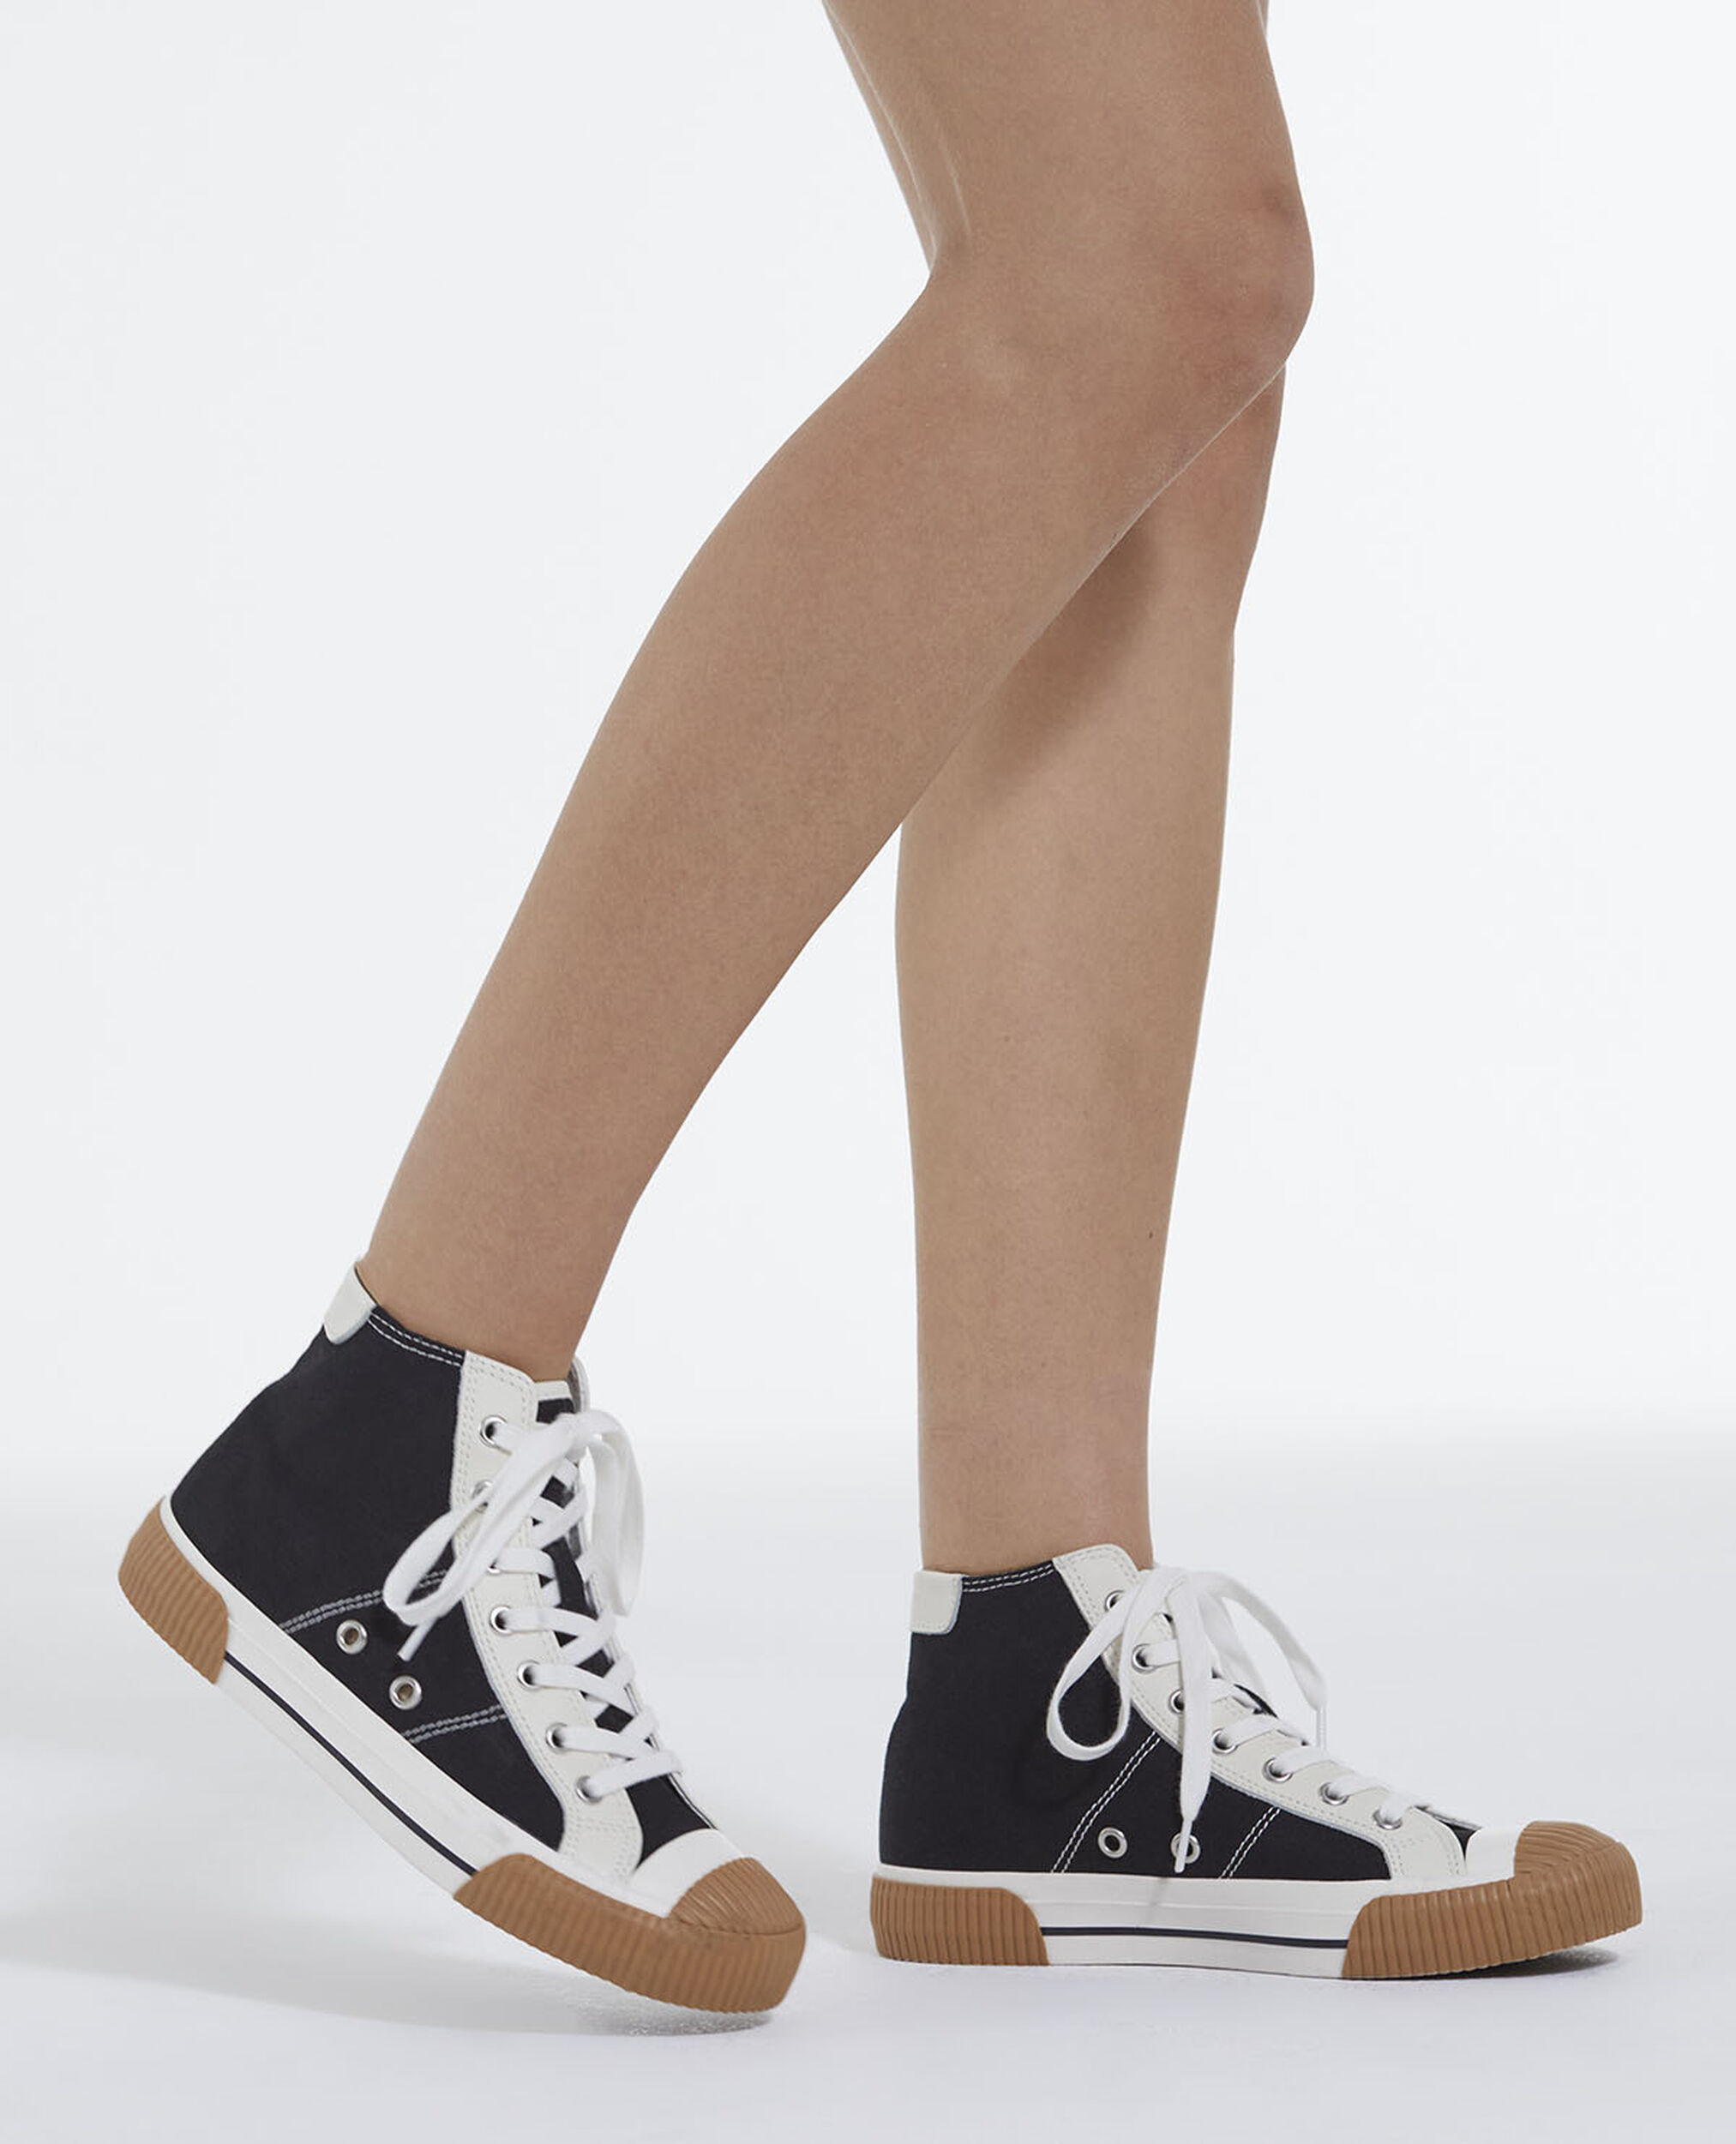 Black high-top lace-up canvas sneakers, BLACK, hi-res image number null